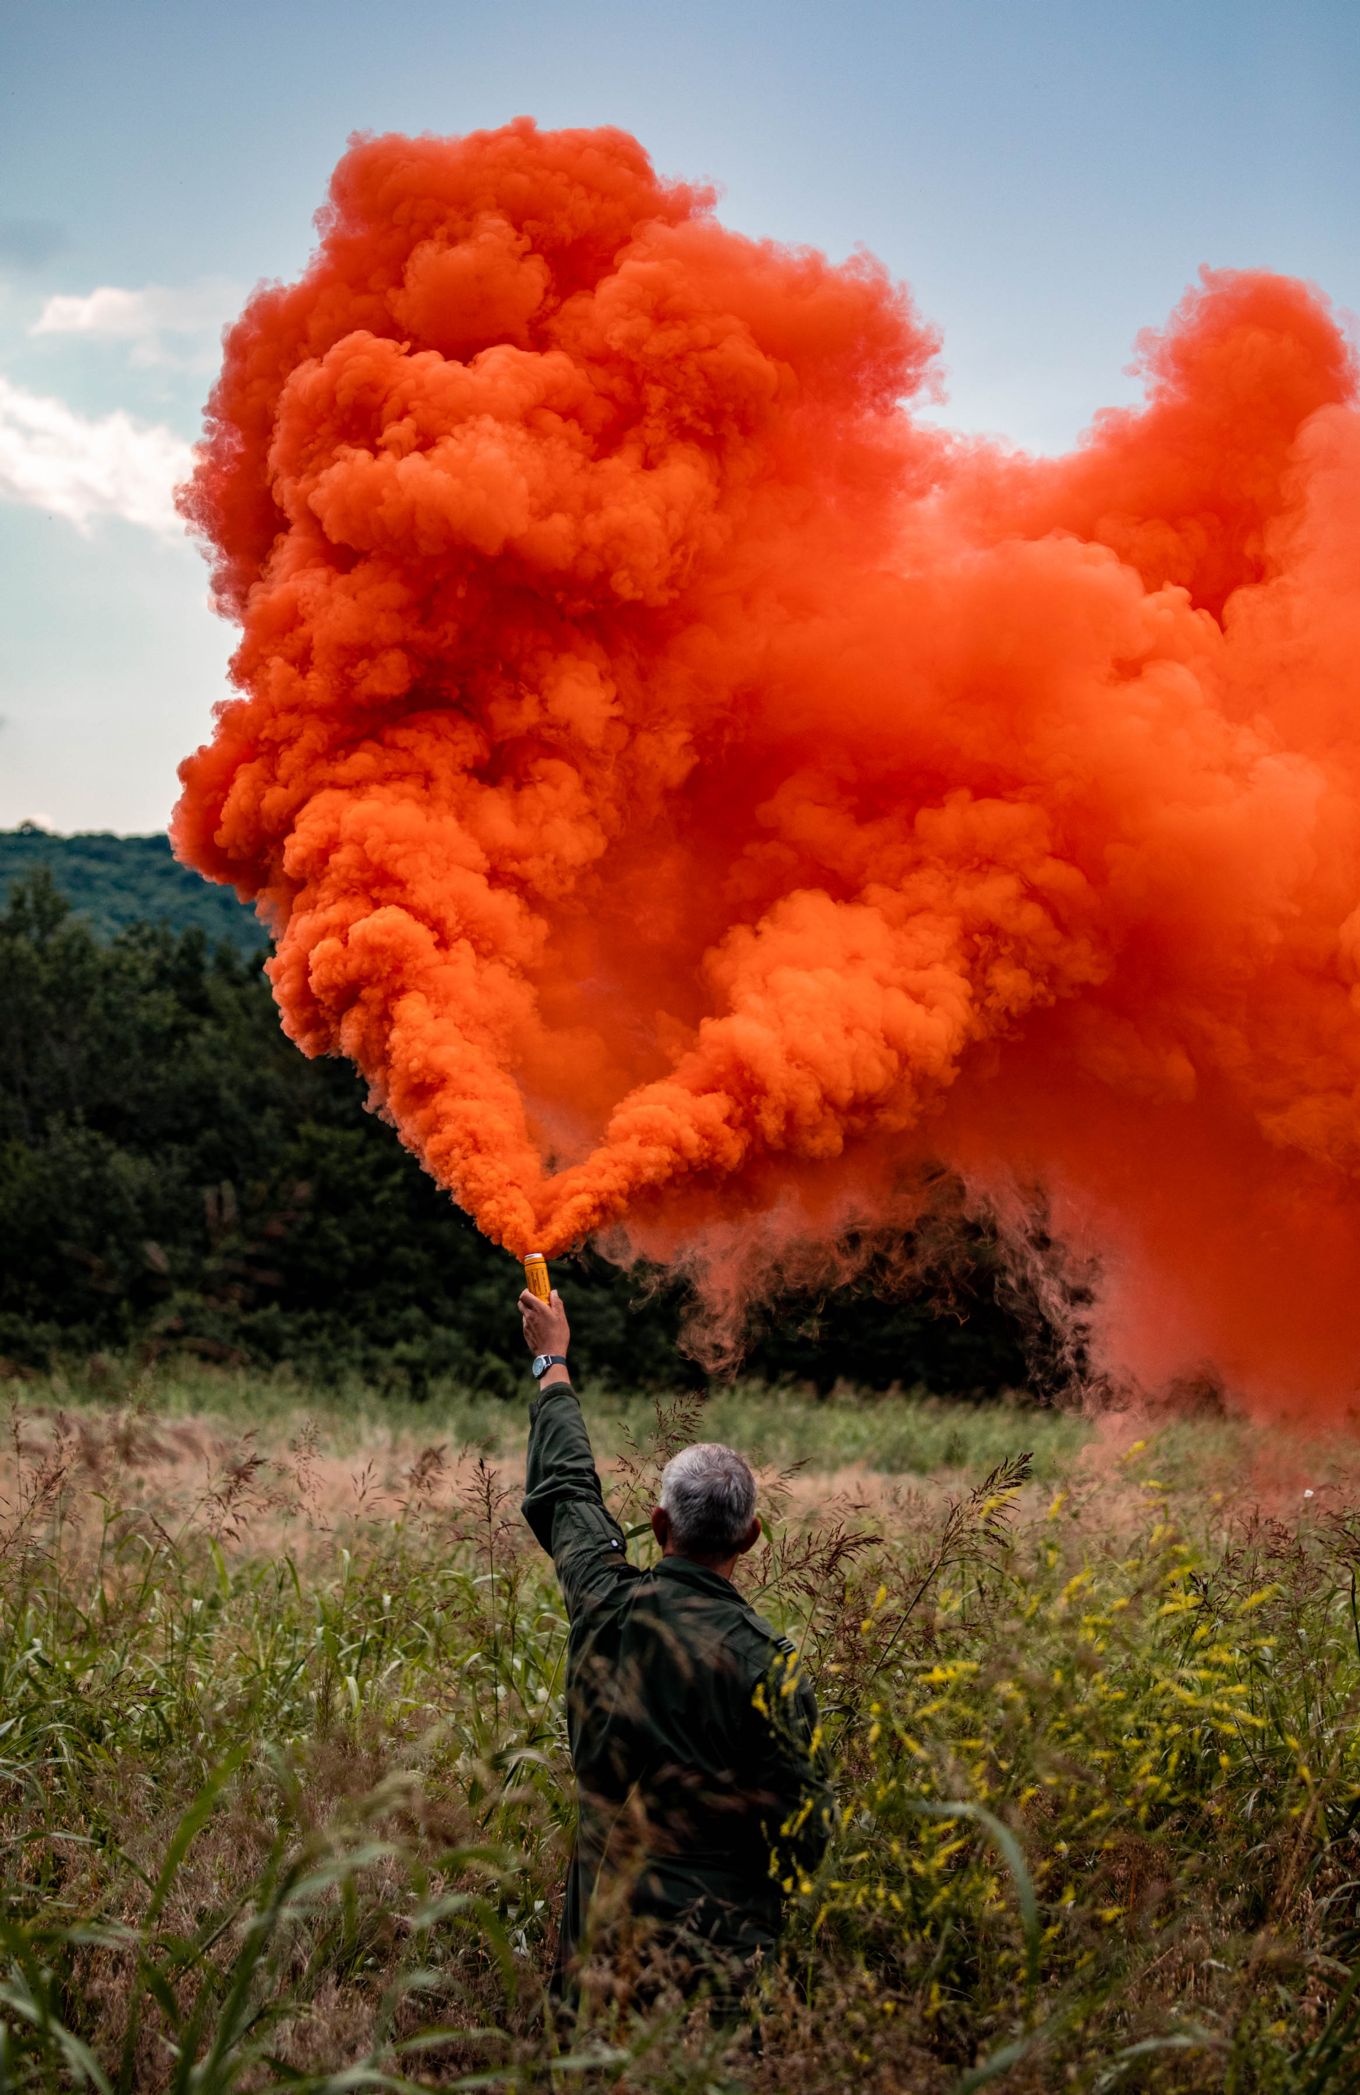 Personnel sets of red smoke flare.